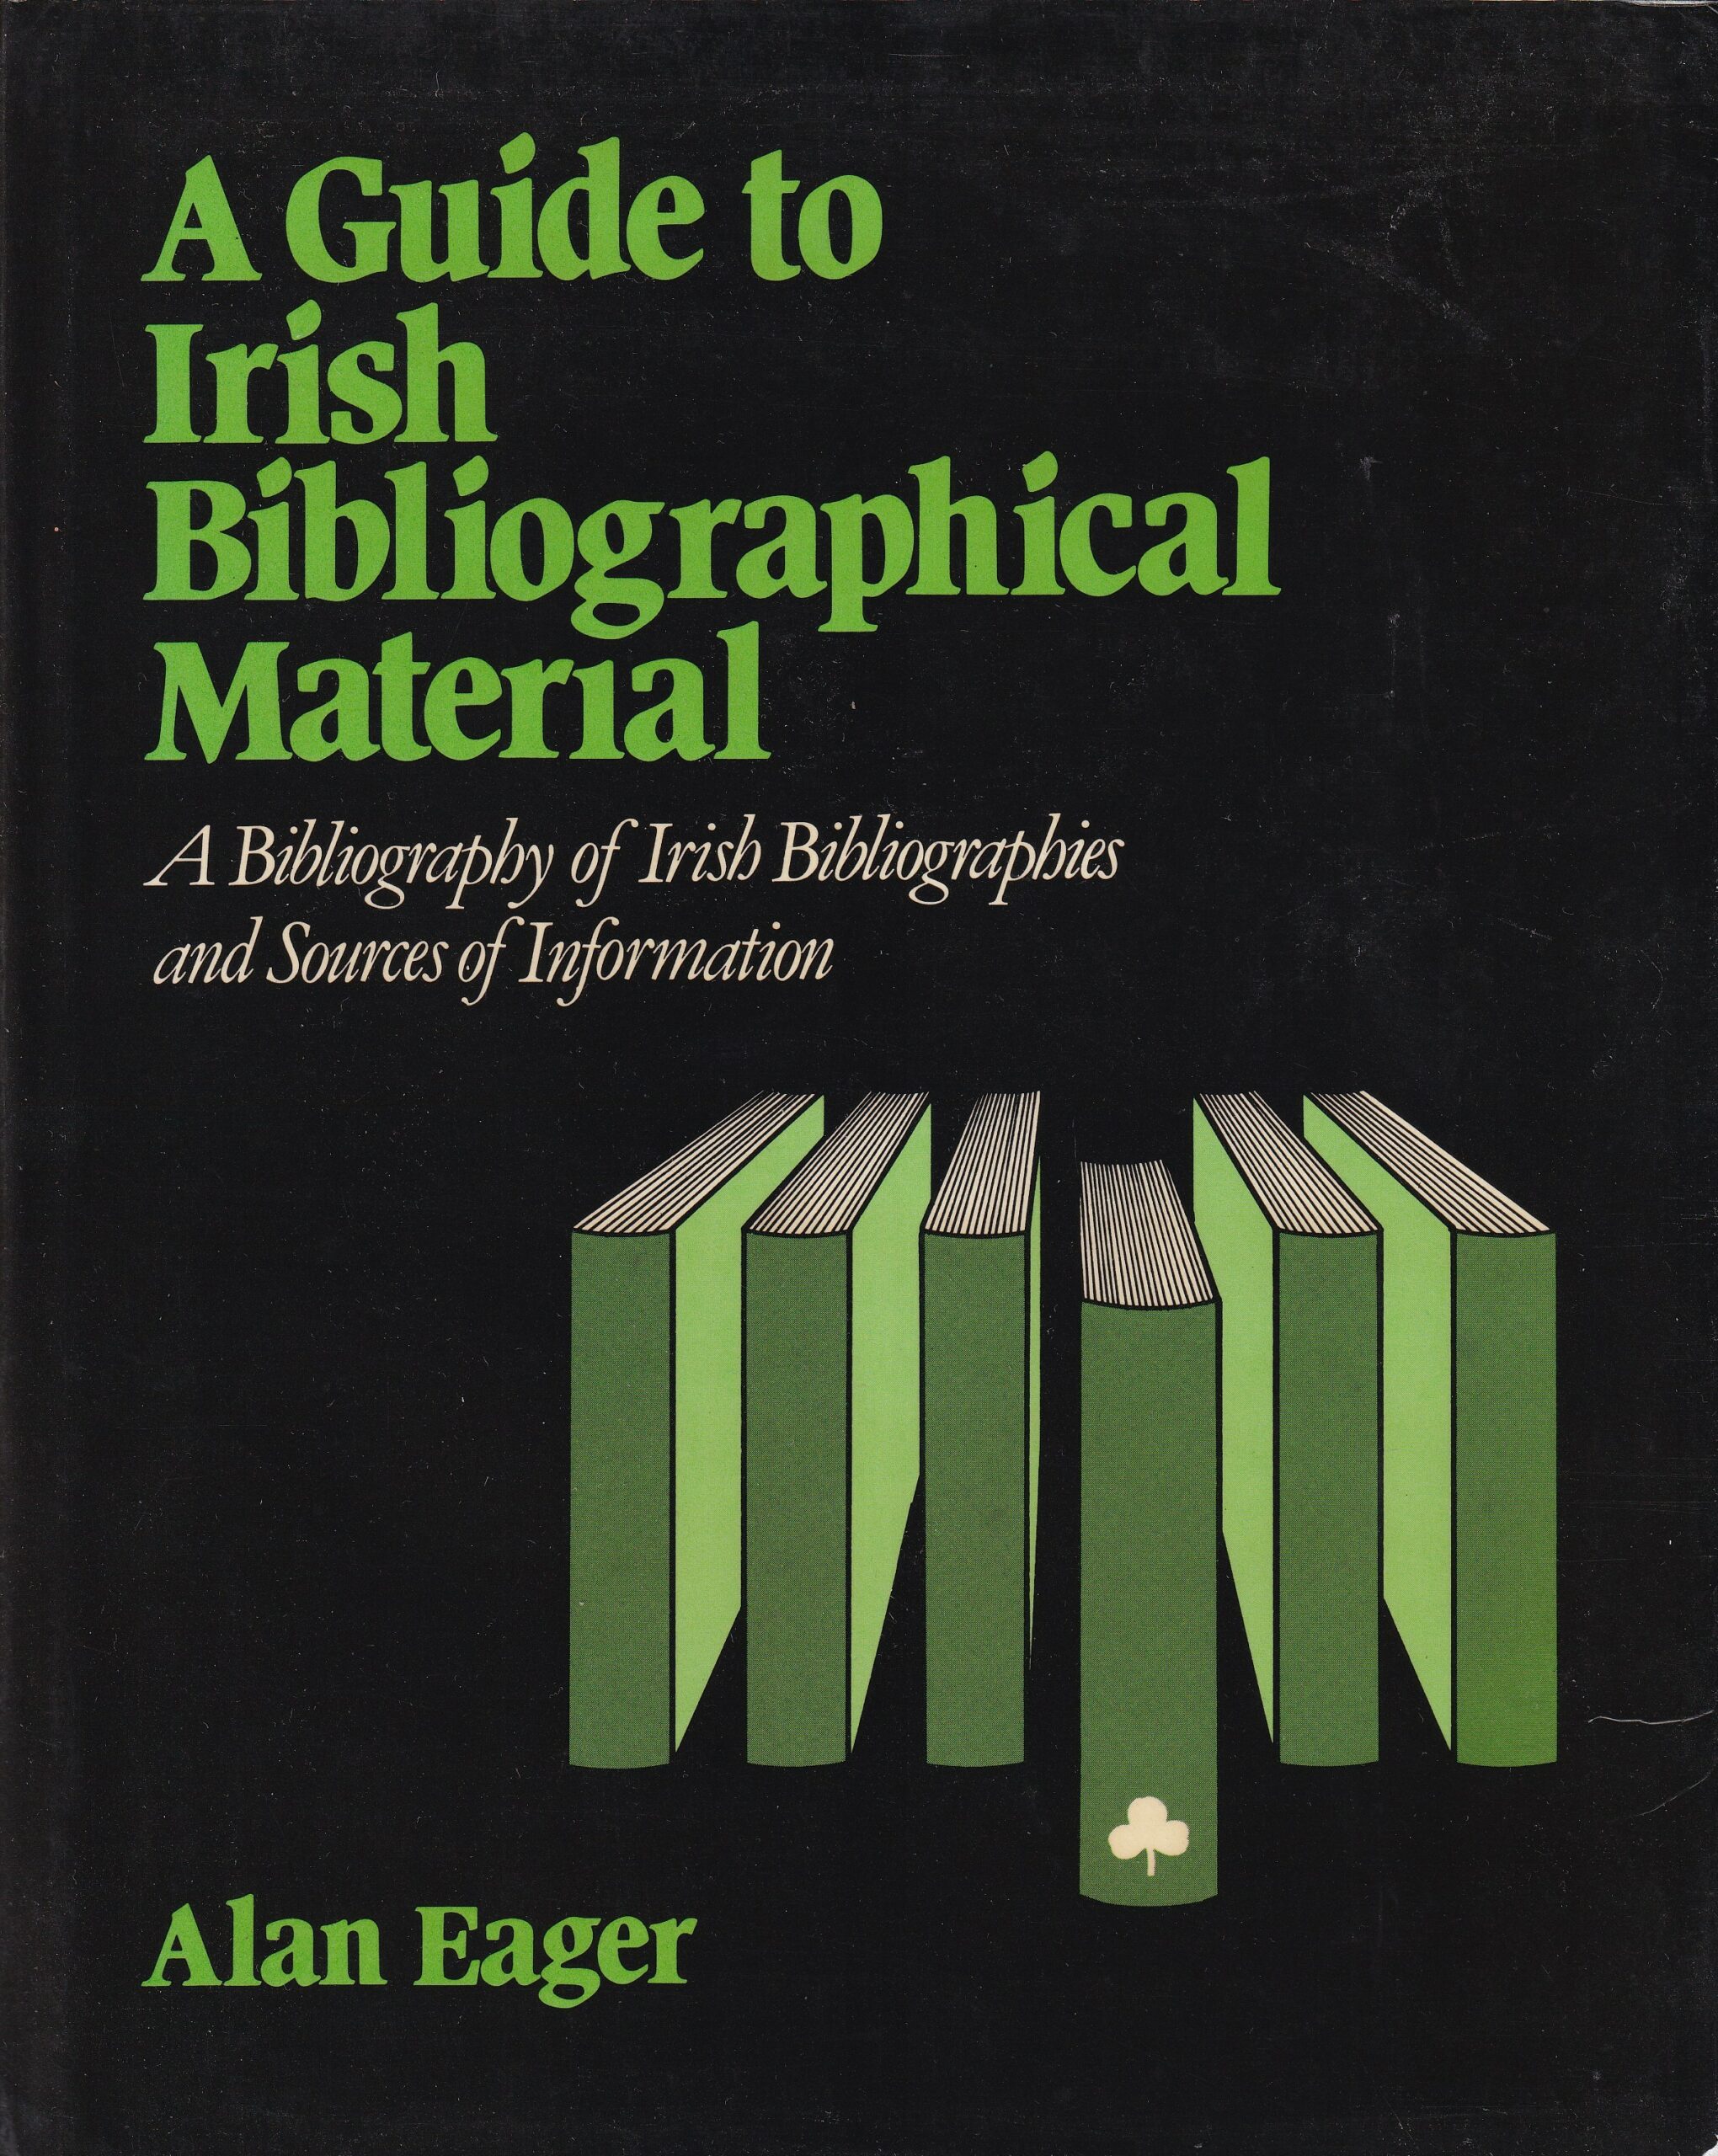 A Guide to Irish Bibliographical Material: A Bibliography of Irish Bibliographies and Sources of Information by Alan Eager